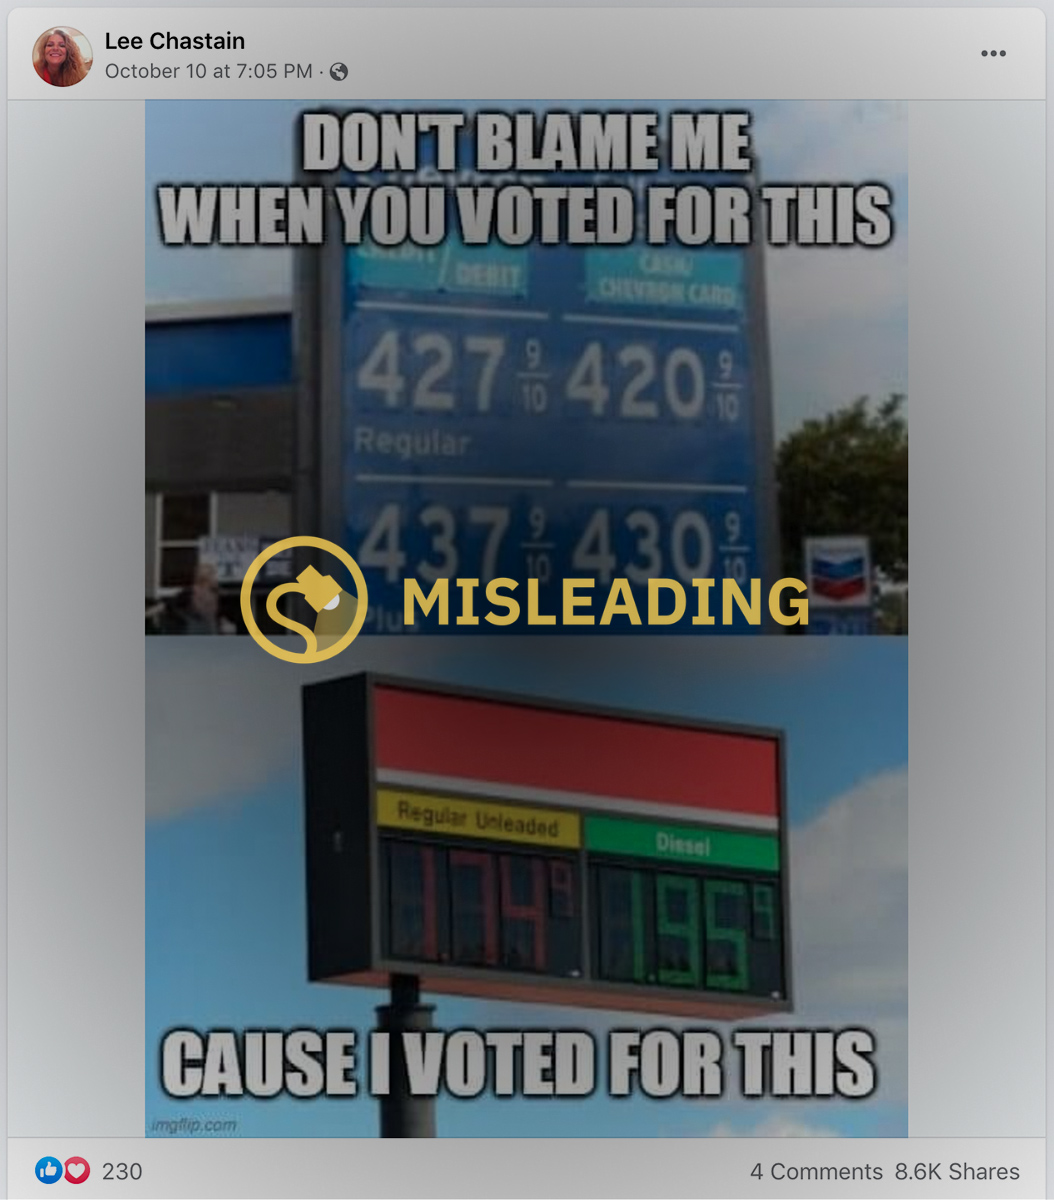 A gas prices meme said don't blame me when you voted for this cause I voted for this and tried to compare Biden and Trump but failed to do so.